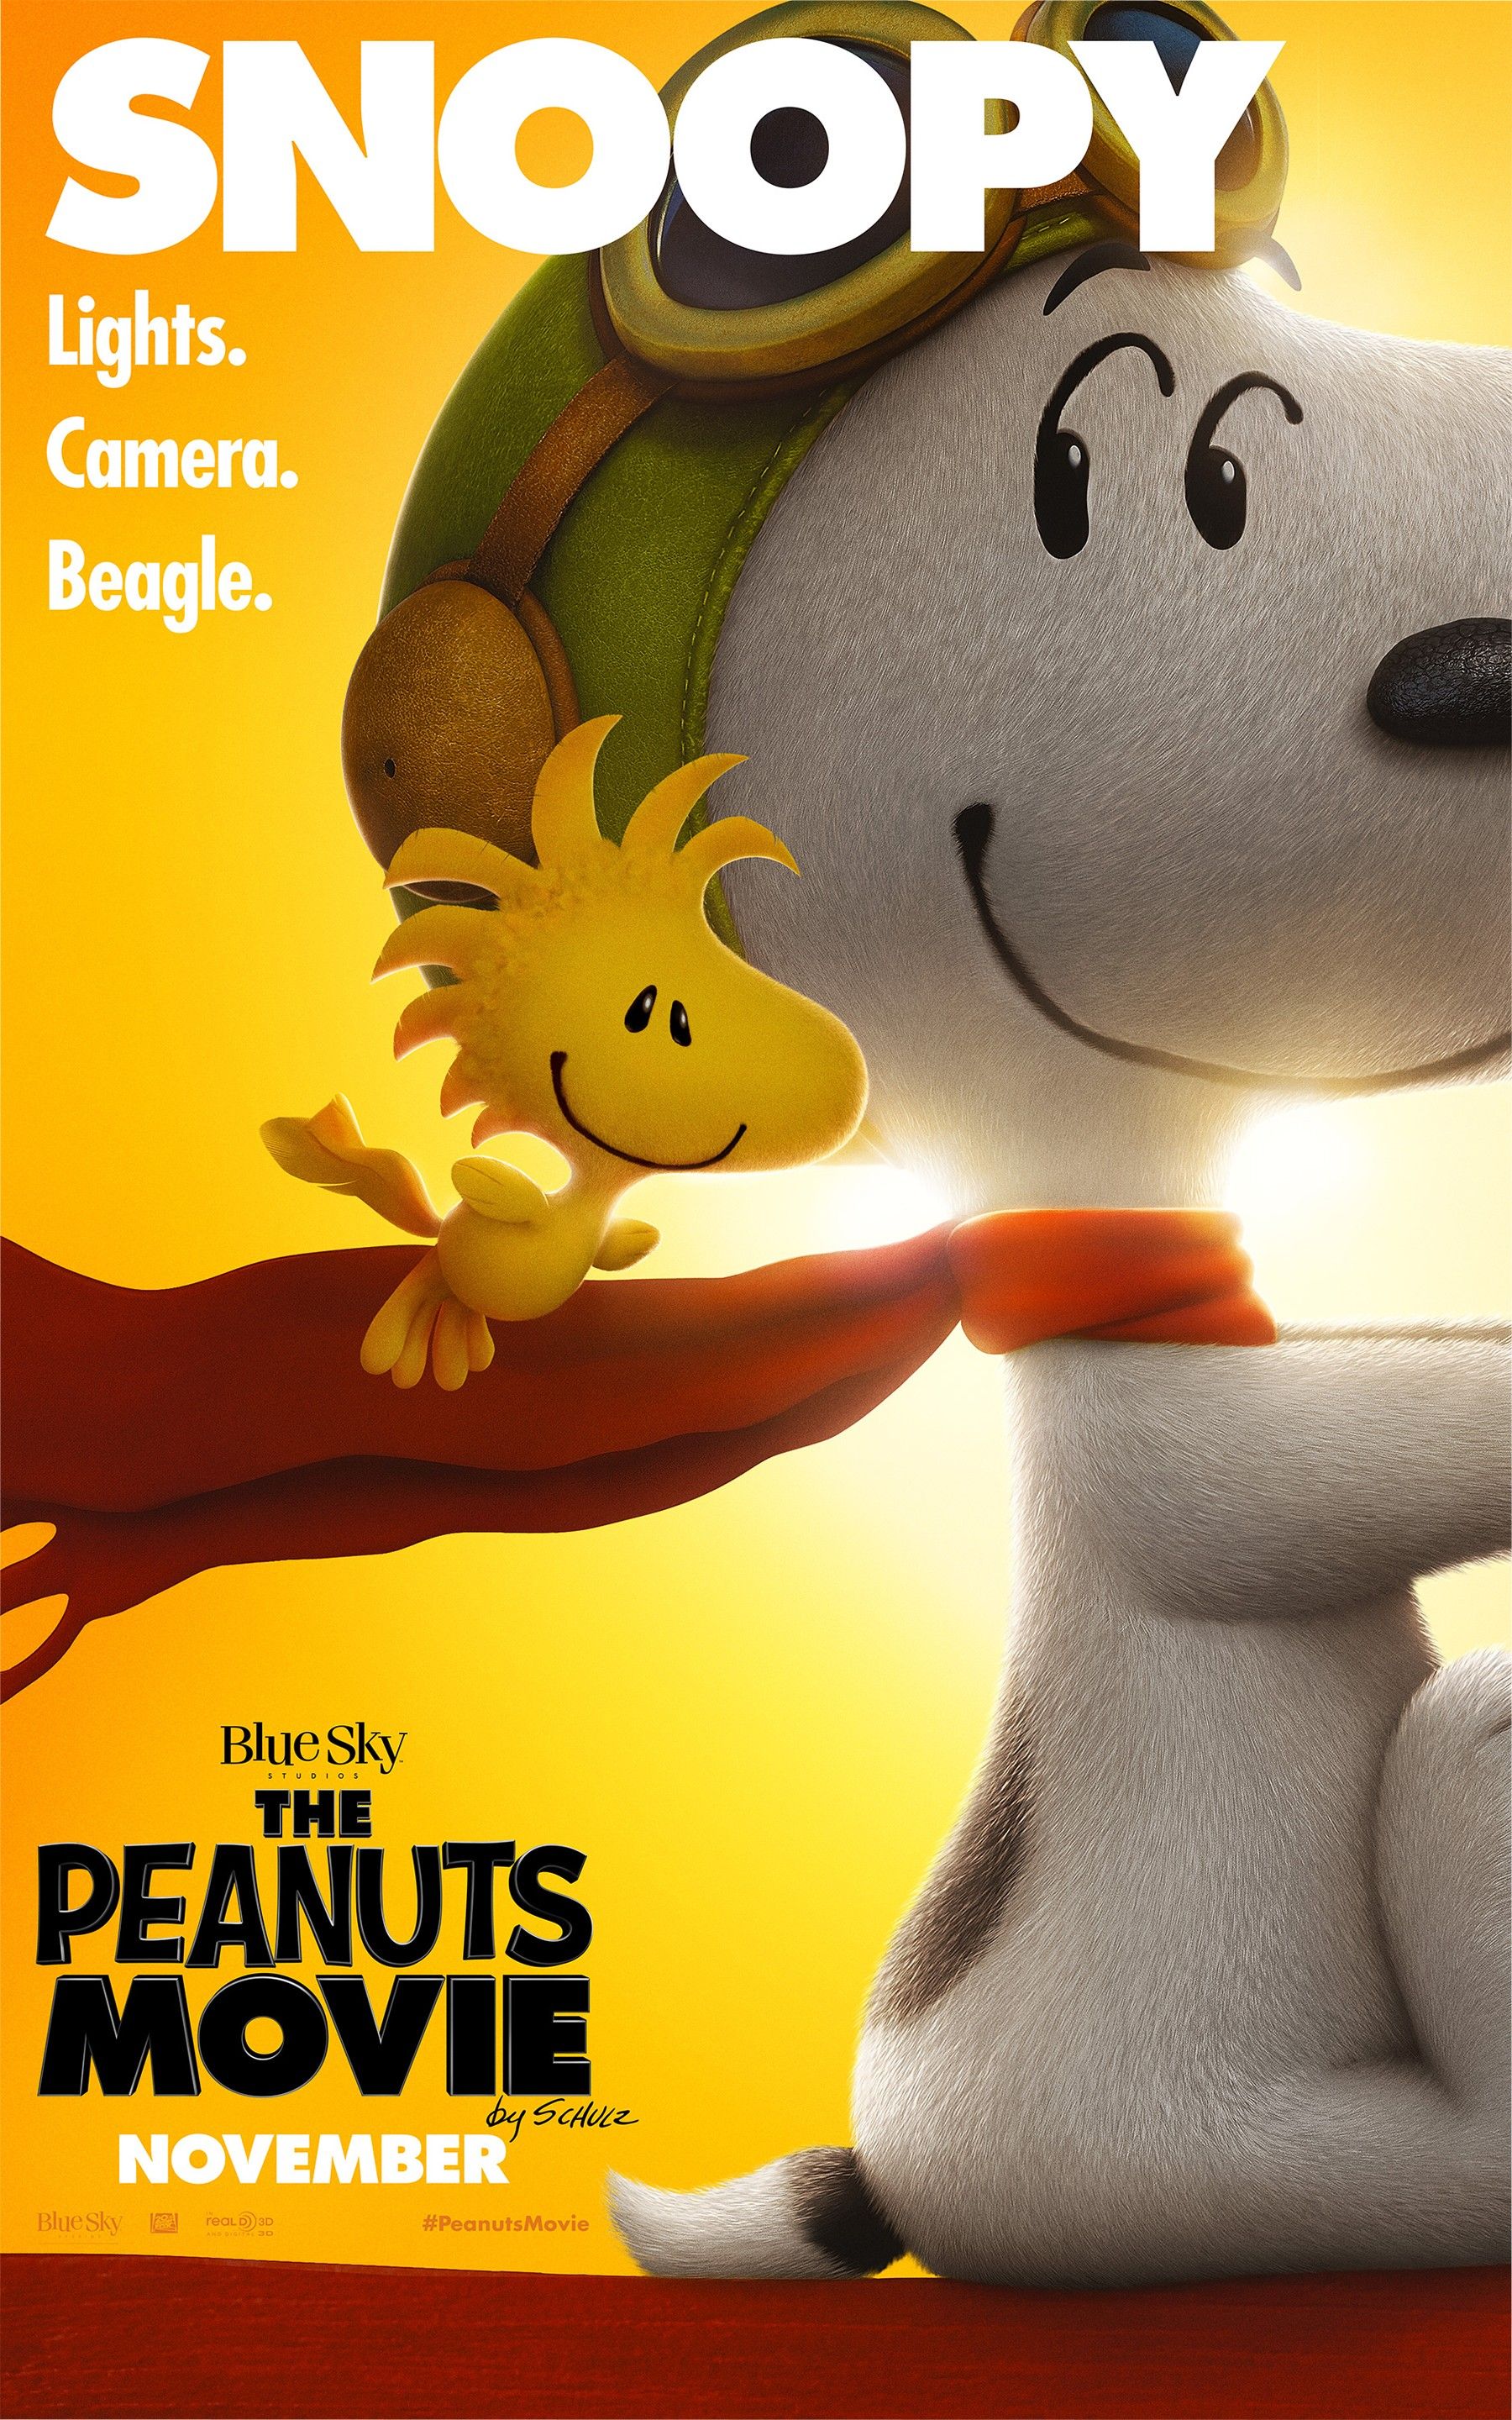 Peanuts Movie Snoopy Character Poster